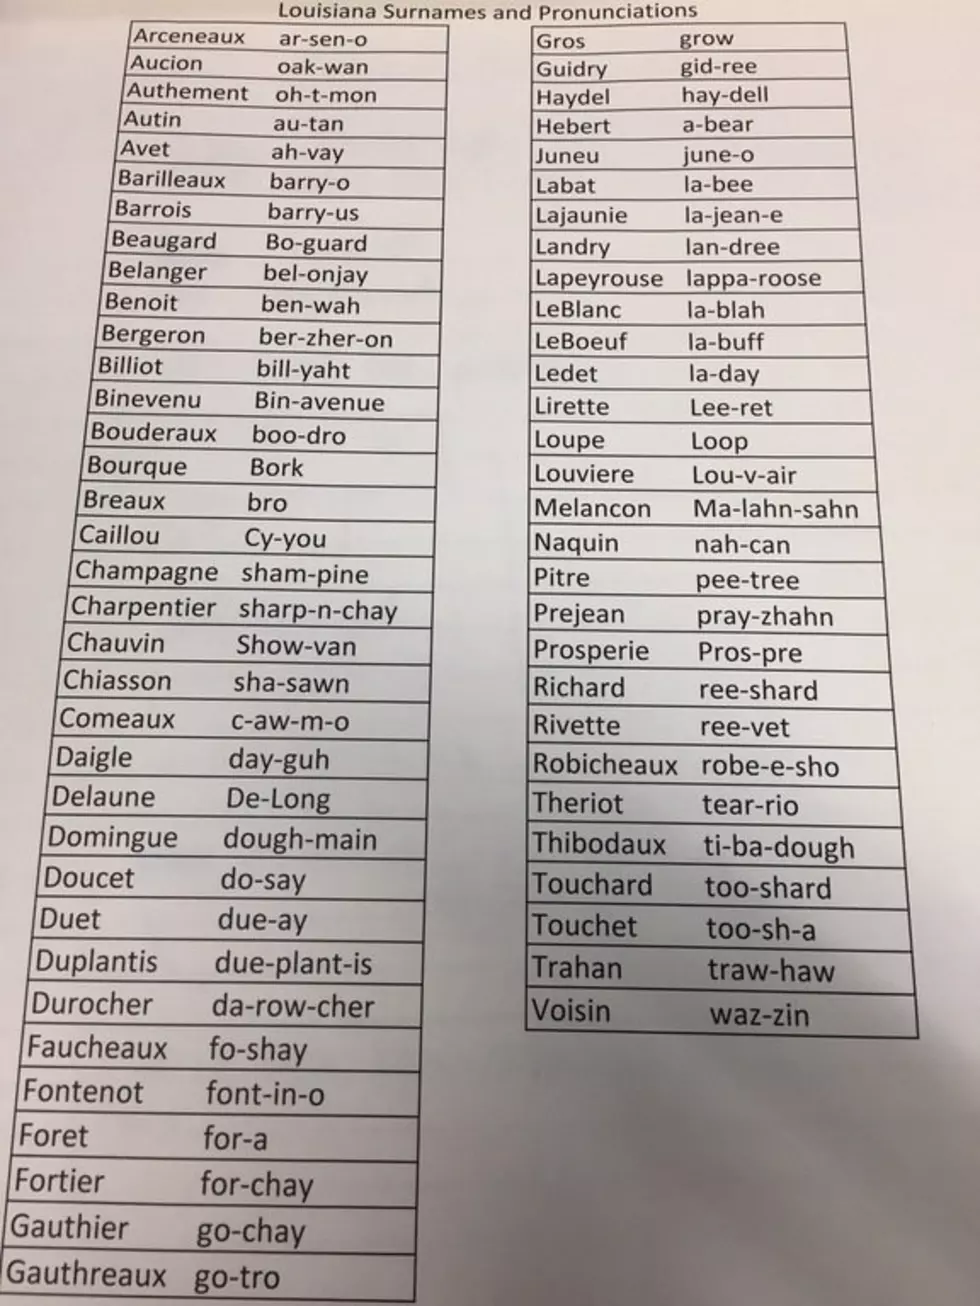 A Sales Executive In New Orleans Was Given This Pronunciation Guide Of Common Louisiana Last Names On His First Day Of Work [PHOTO]